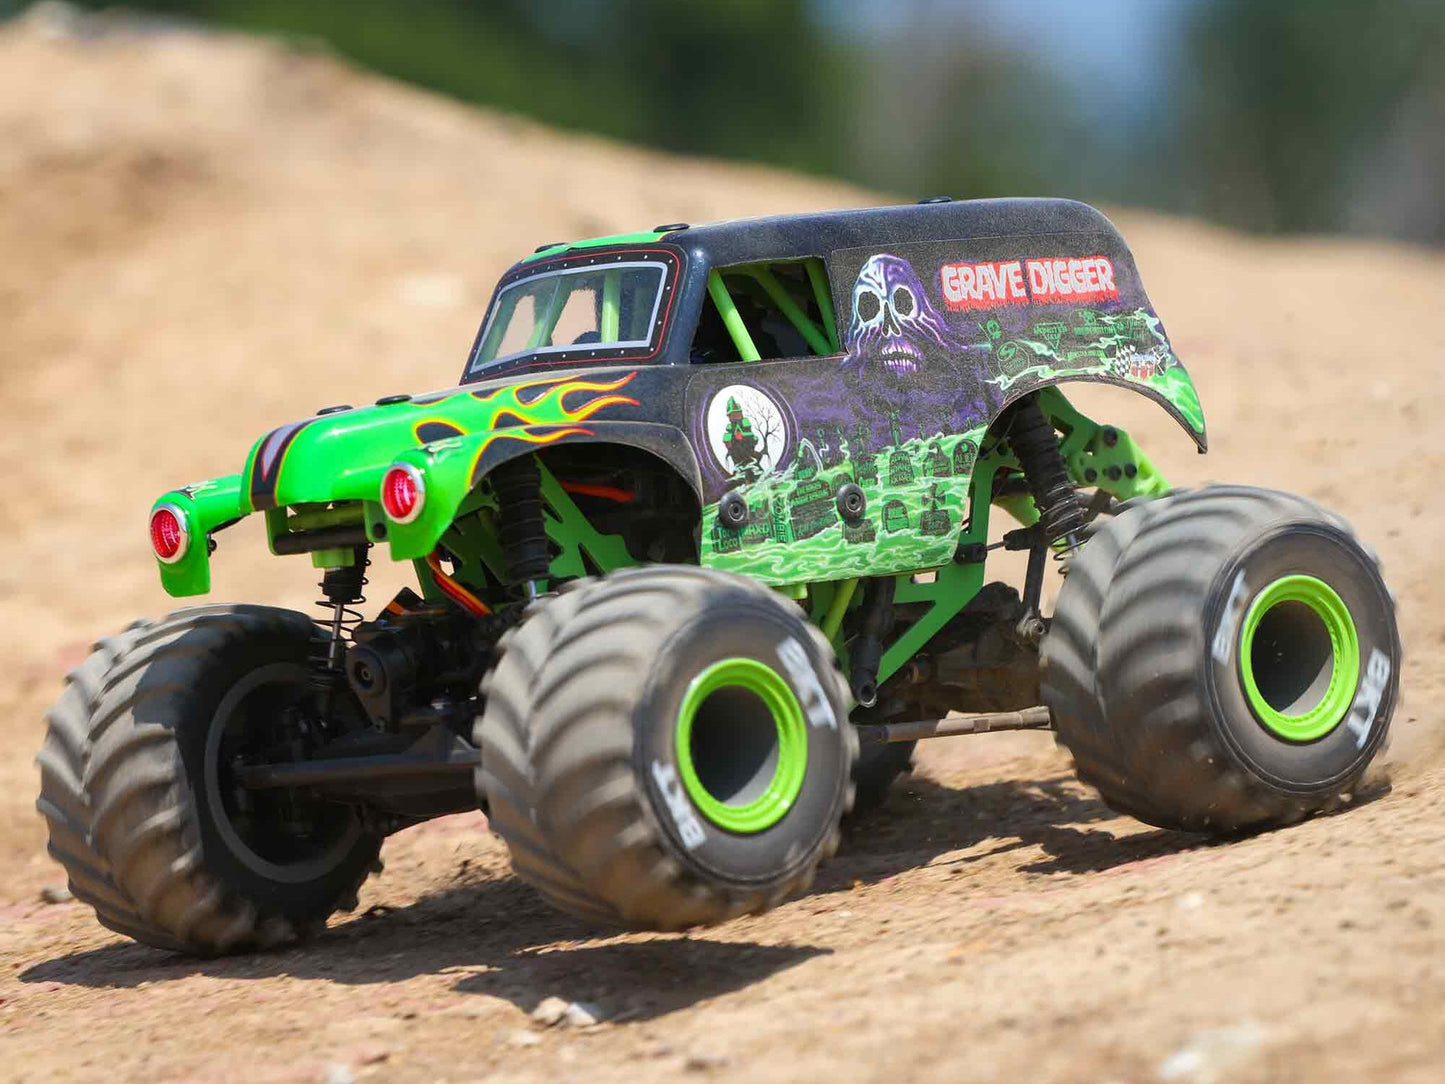 Losi 1/18 Mini LMT 4X4 Brushed Monster Truck RTR - Grave Digger  LOS01026T1